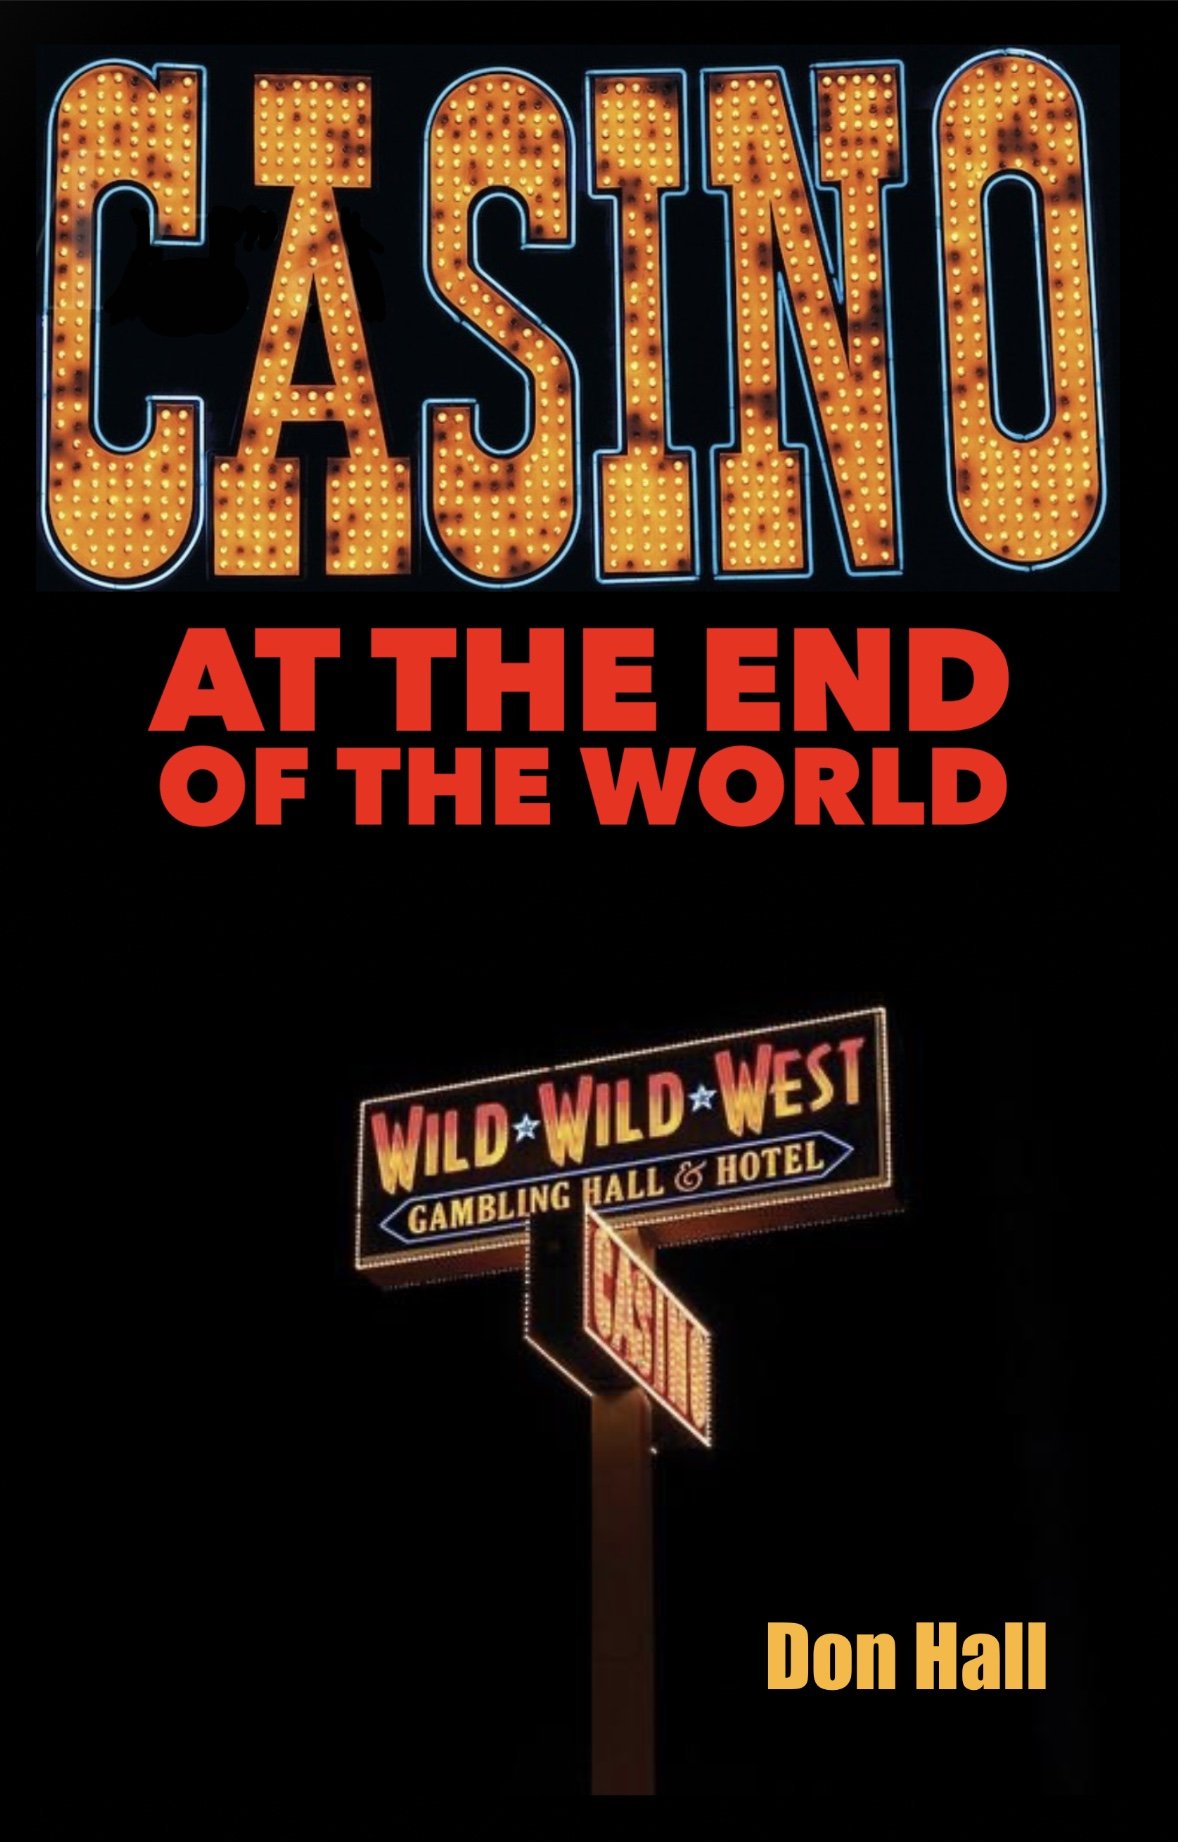 Casino at the End of the World